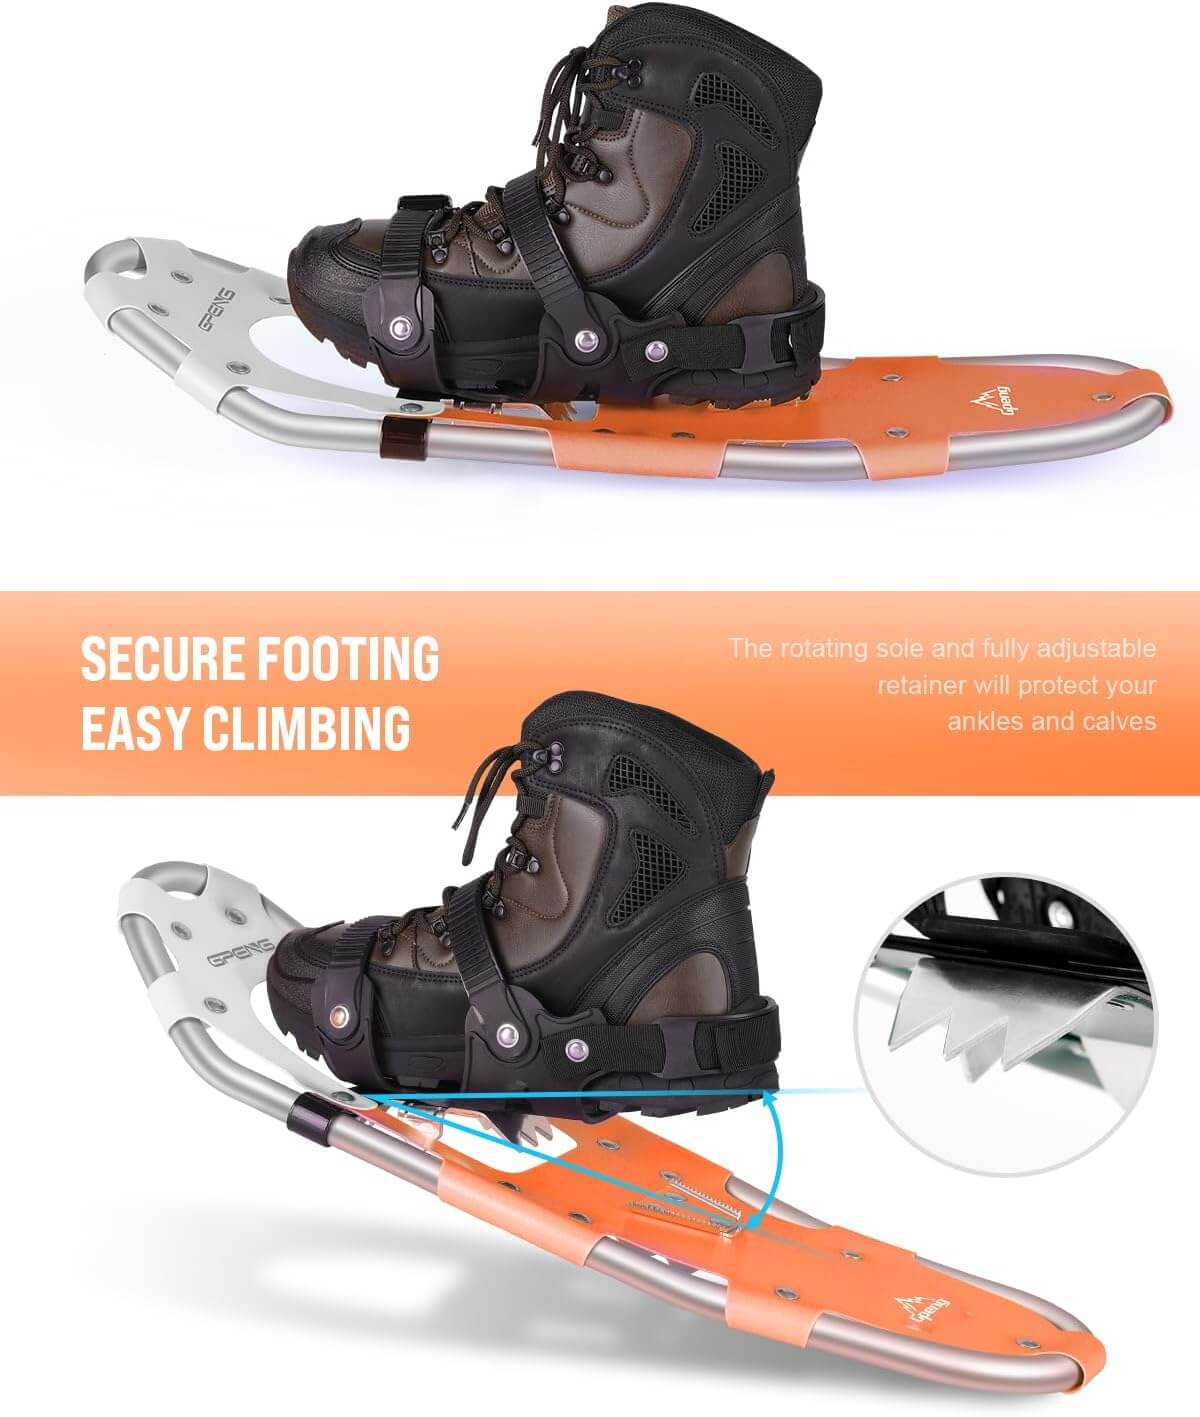 Shop The Latest >3-in-1 Xtreme Lightweight Terrain Snowshoes with Trekking Poles > *Only $107.95*> From The Top Brand > *‎Gpengl* > Shop Now and Get Free Shipping On Orders Over $45.00 >*Shop Earth Foot*